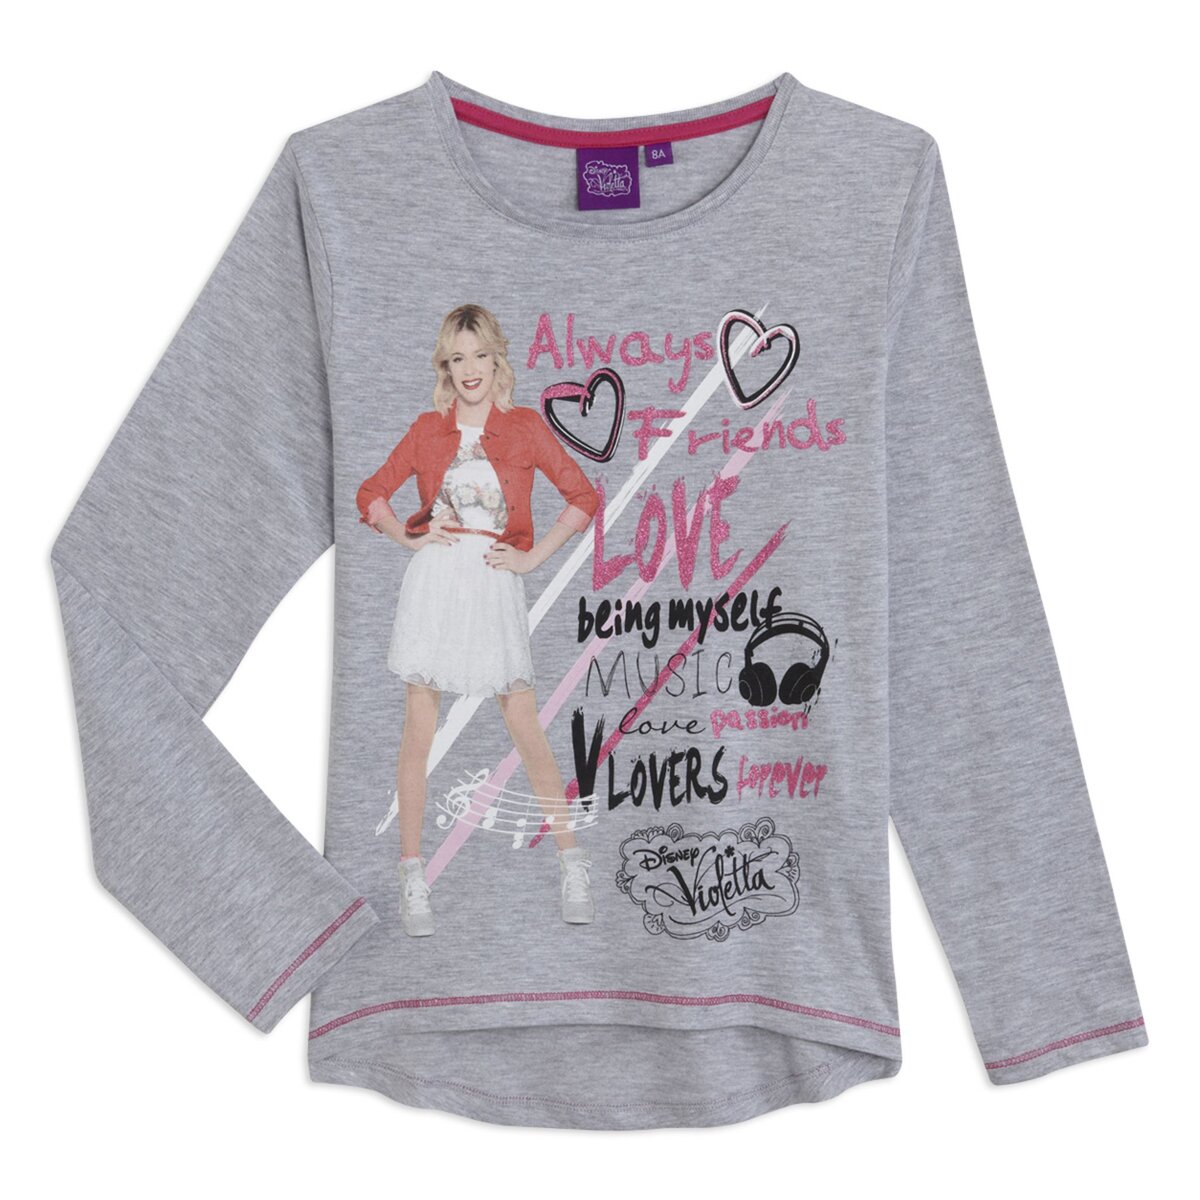 Violetta Tee-shirt manches longues fille 